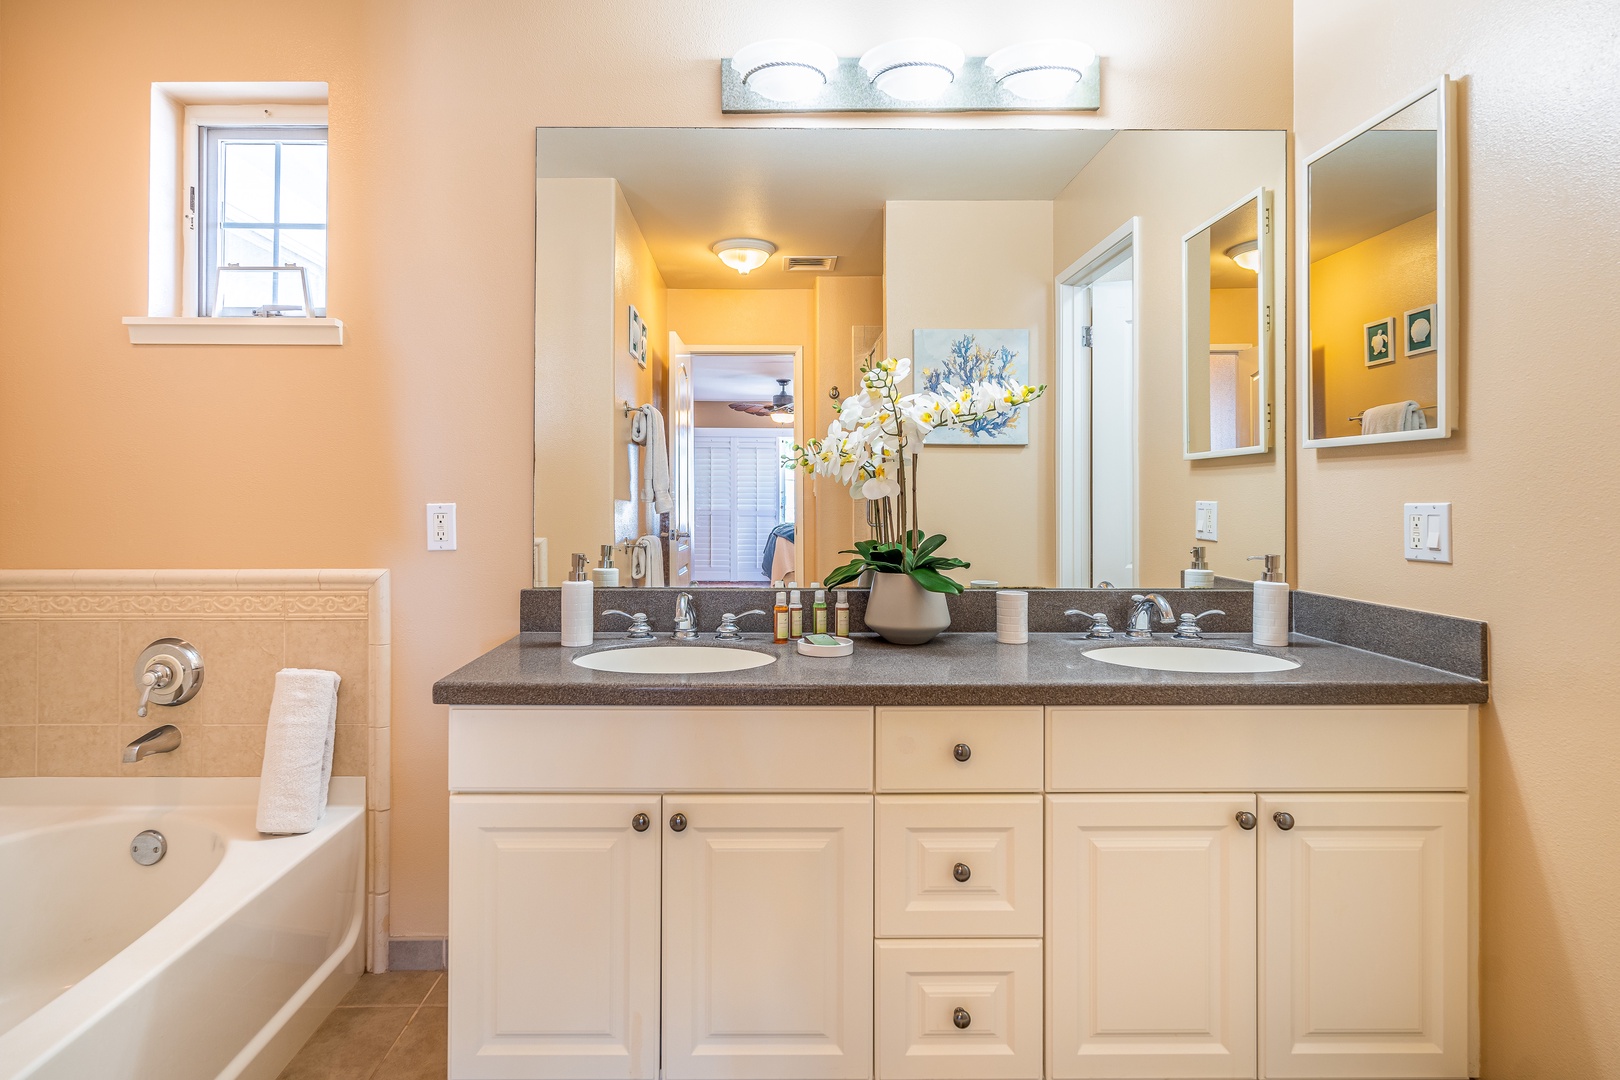 Kapolei Vacation Rentals, Ko Olina Kai 1081C - The primary guest bathroom with a soaking tub and double vanity.